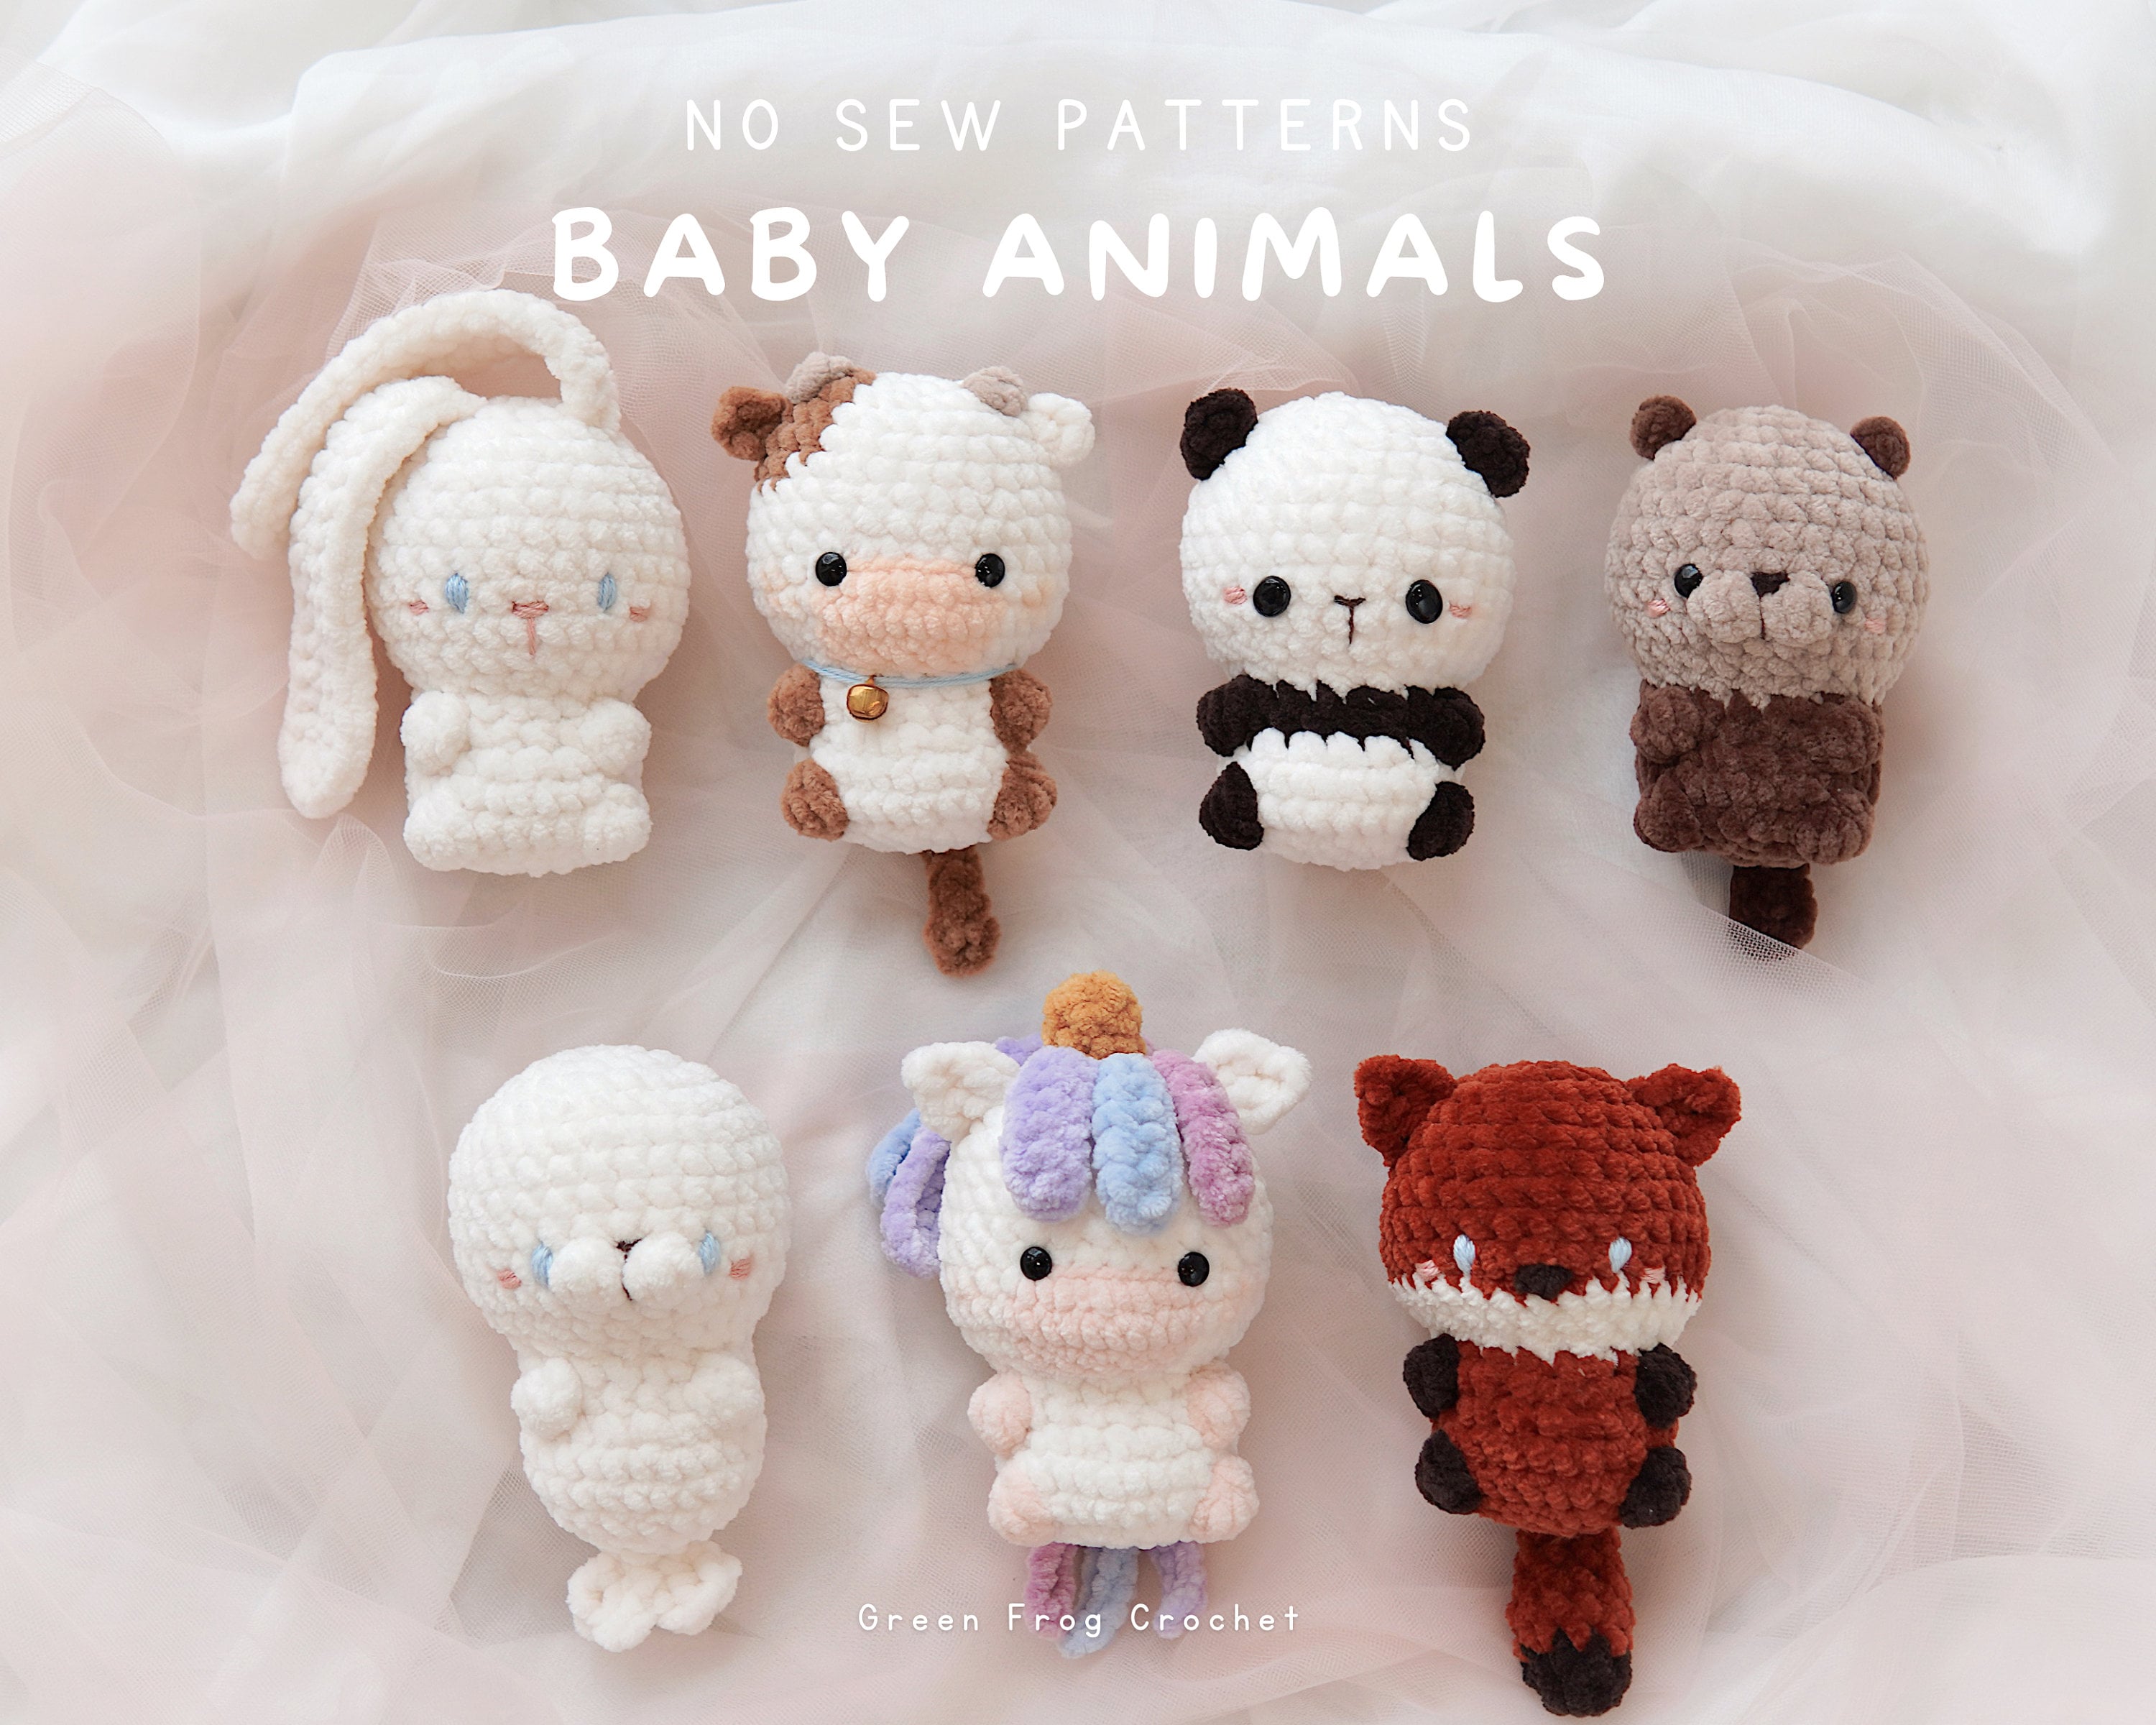 Whimsical Stitches: Book of Amigurumi Crochet Patterns: Gift for